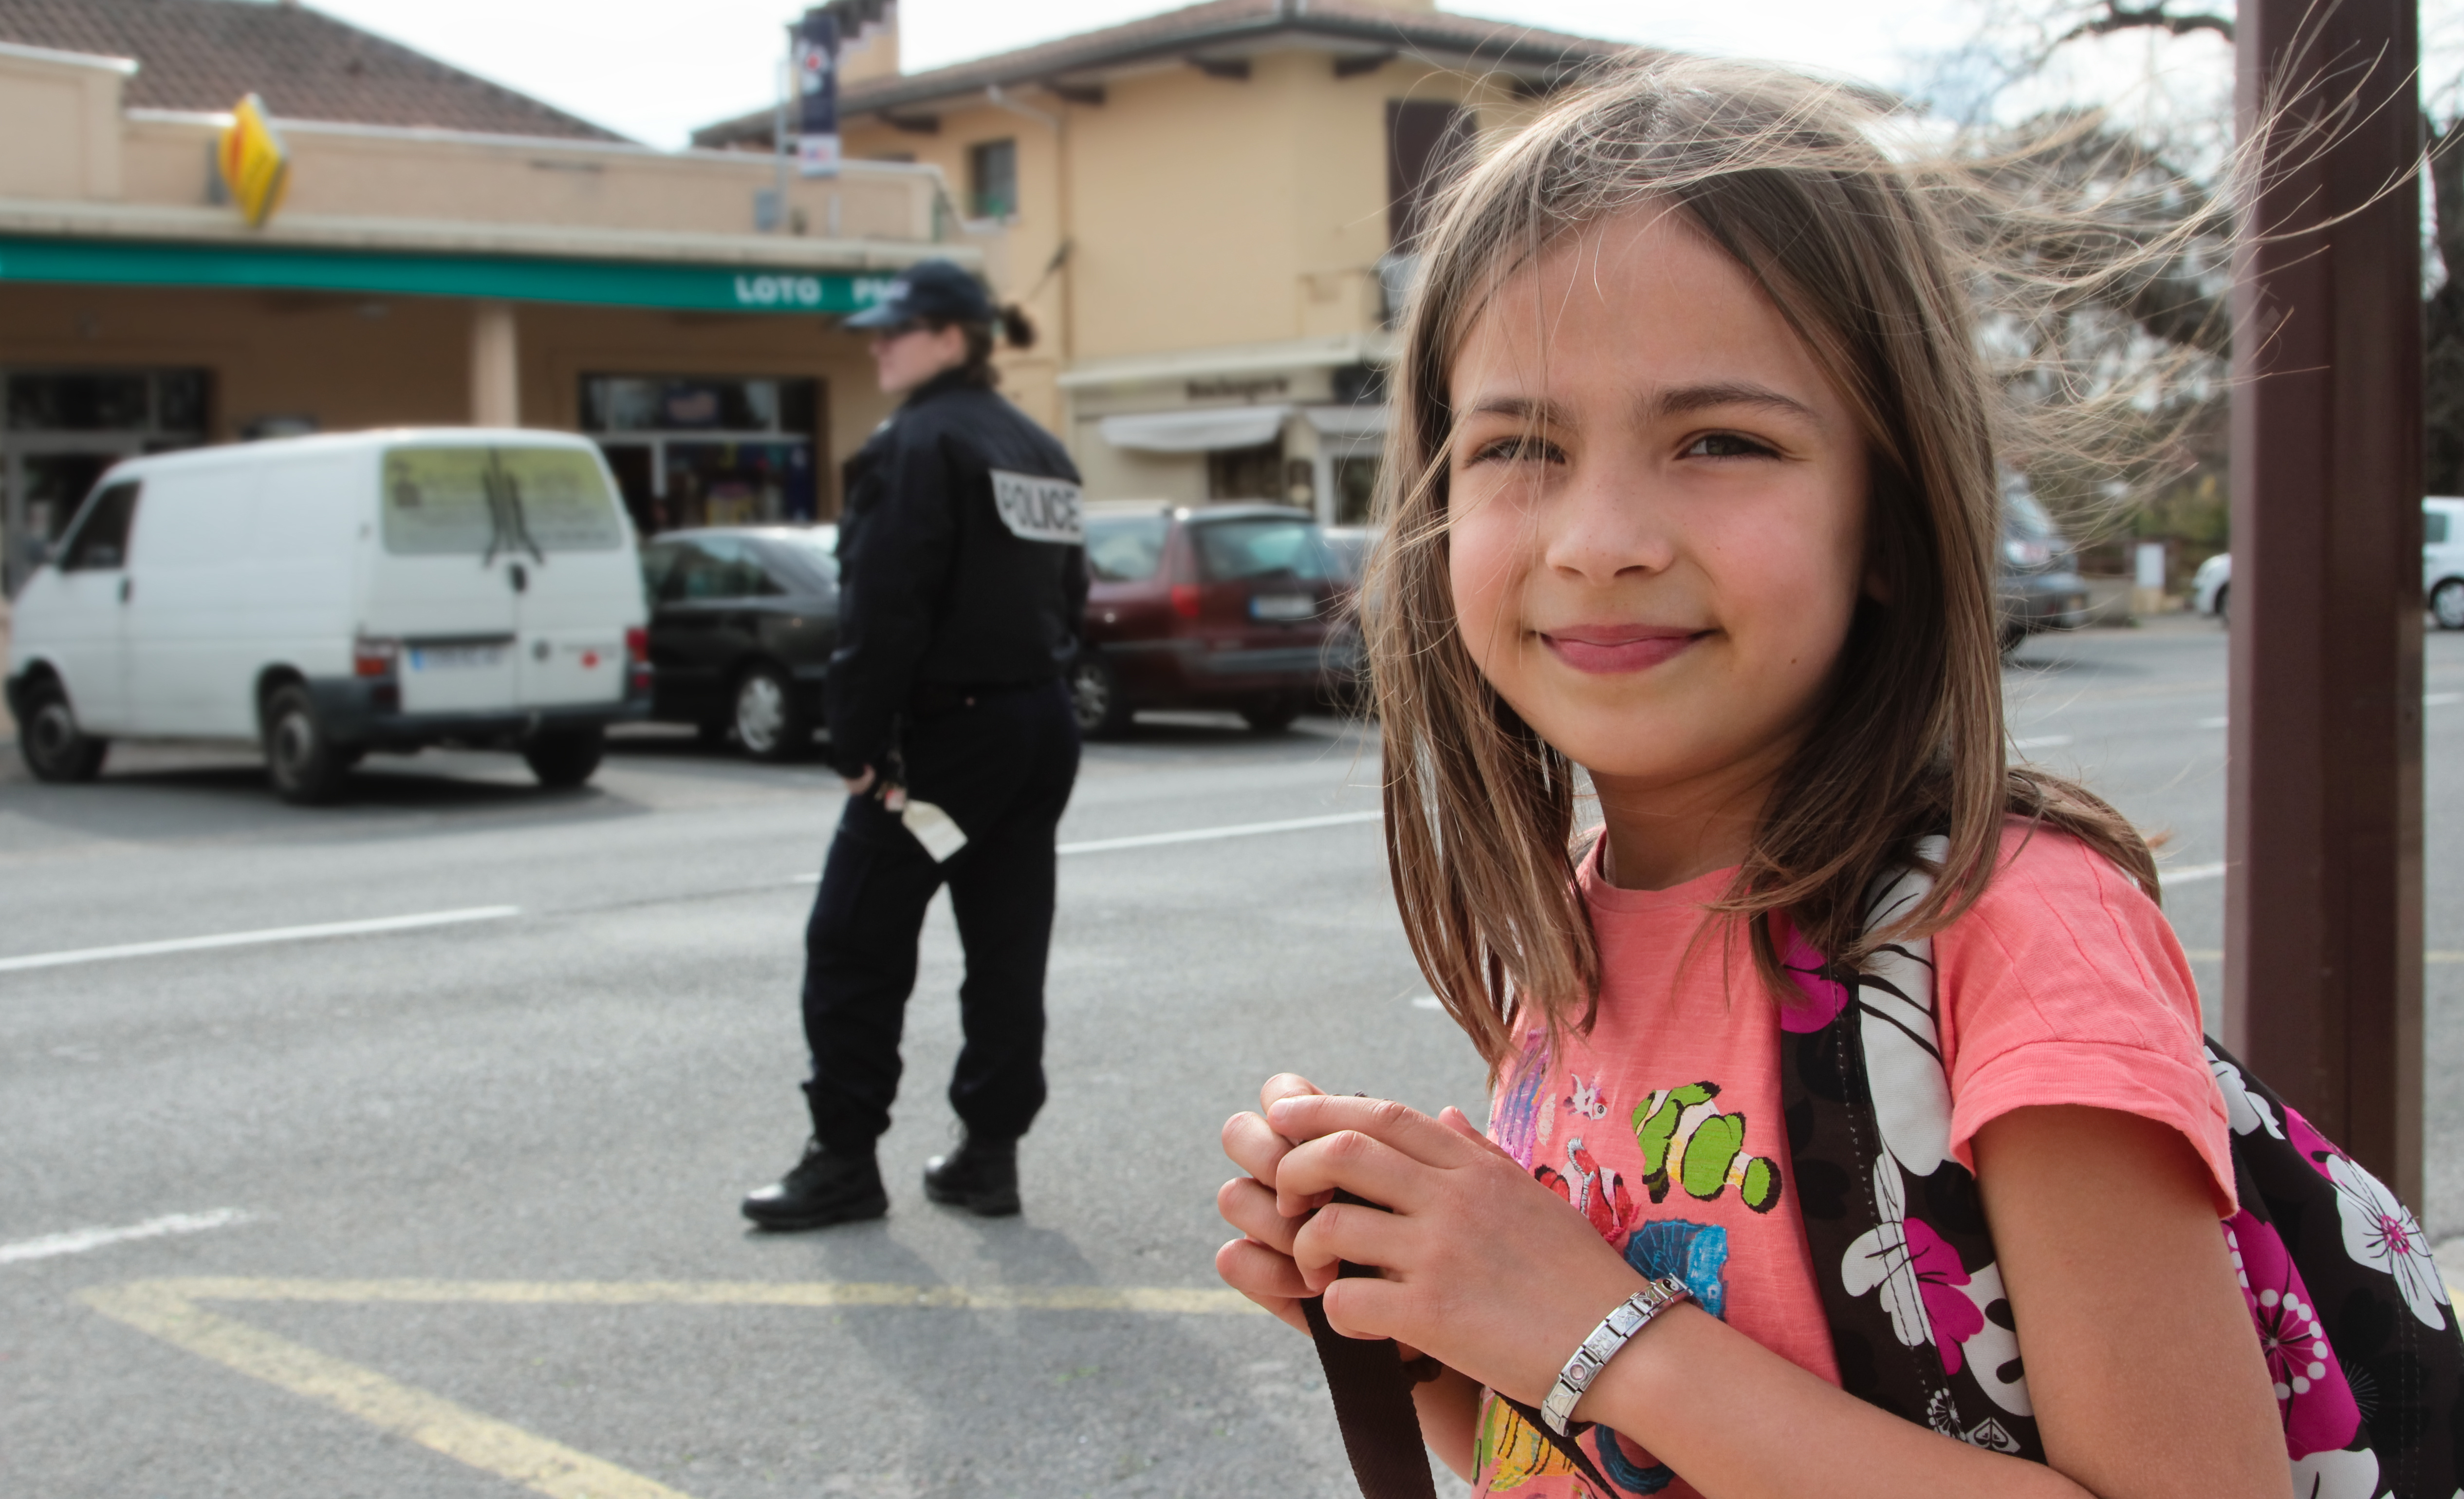 Prevention and Safety Personified: Smiling Girl and Blurred Policeman Symbolize the Mayor’s Mission